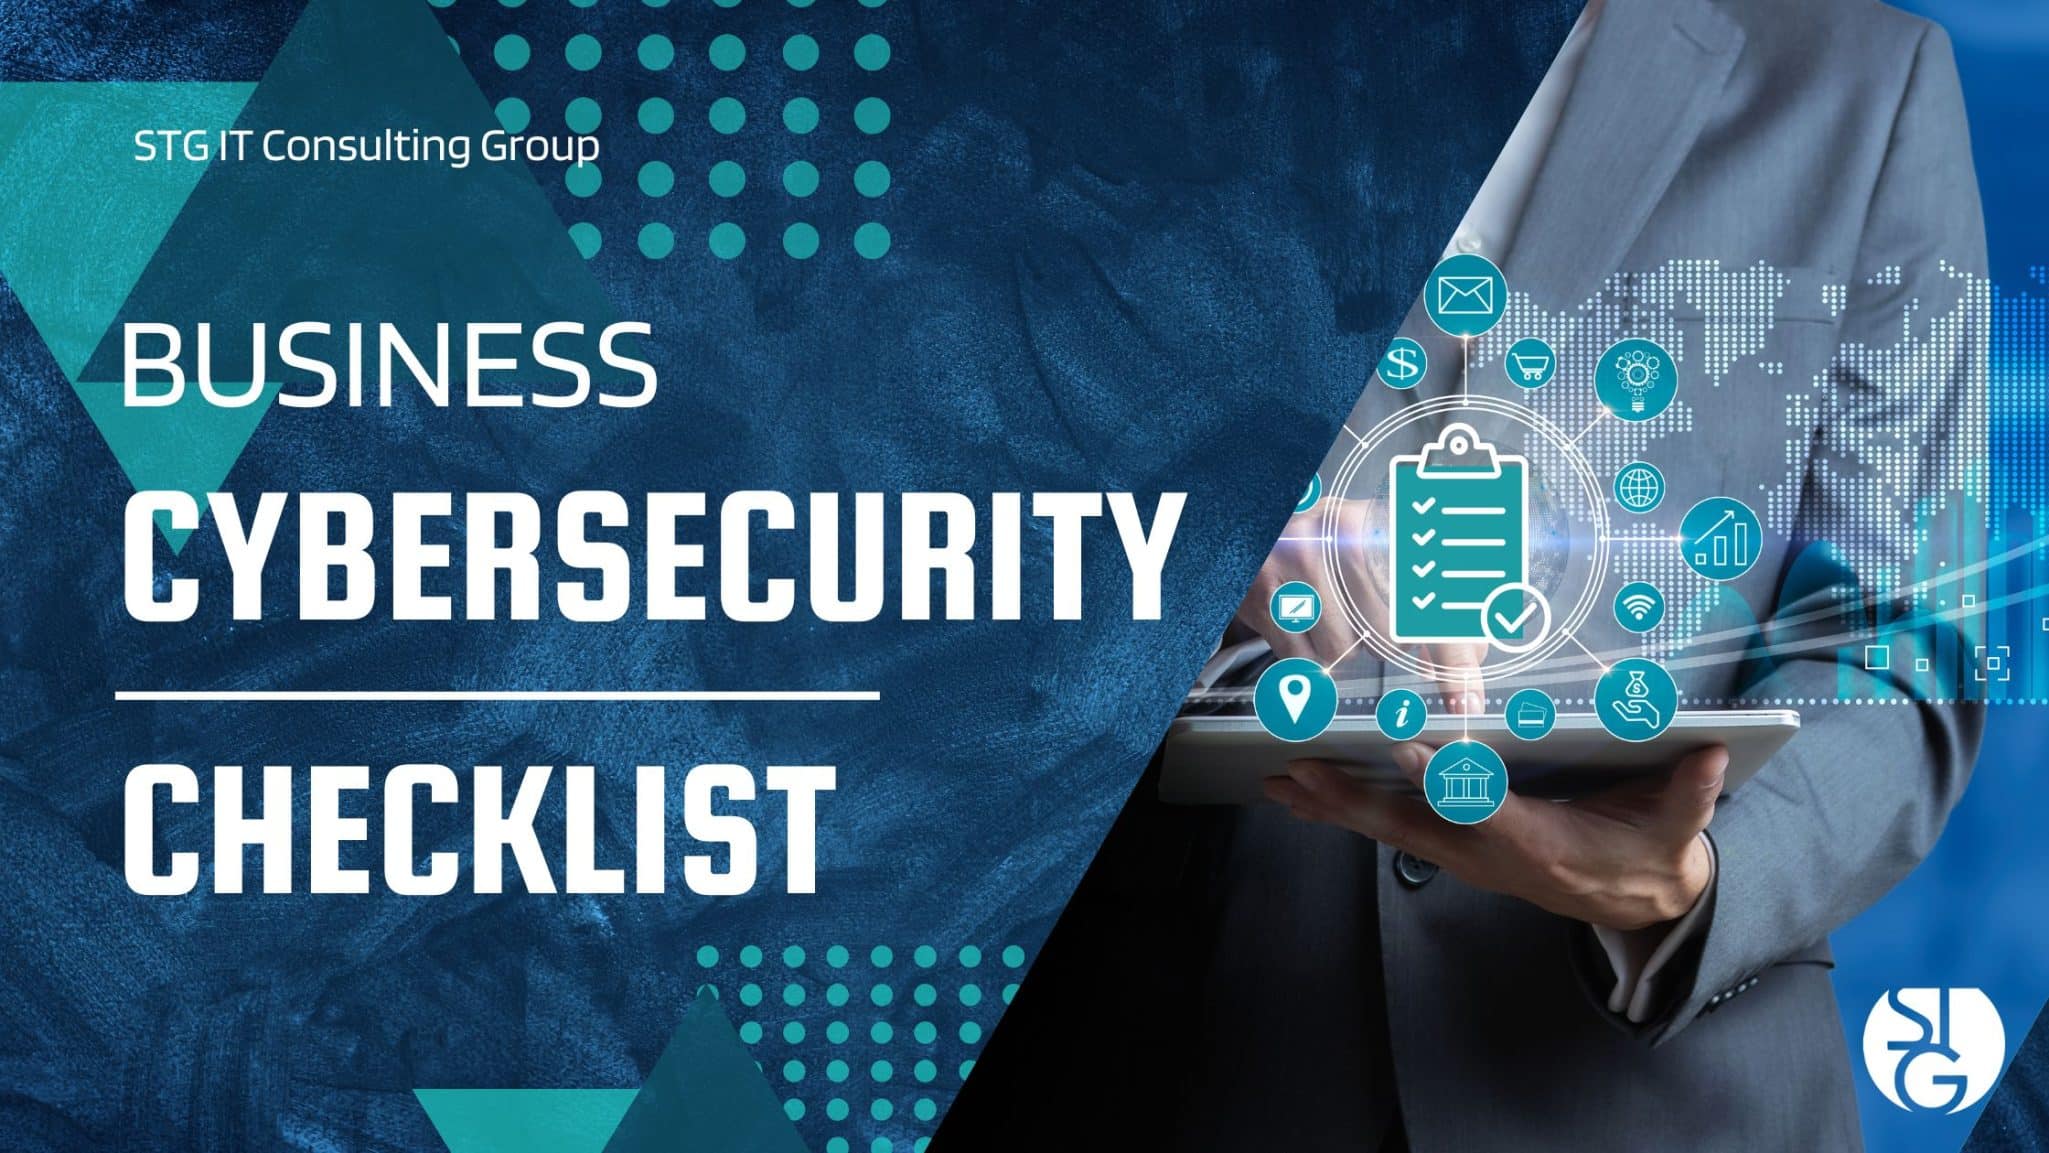 Business CyberSecurity Checklist You Should be Following